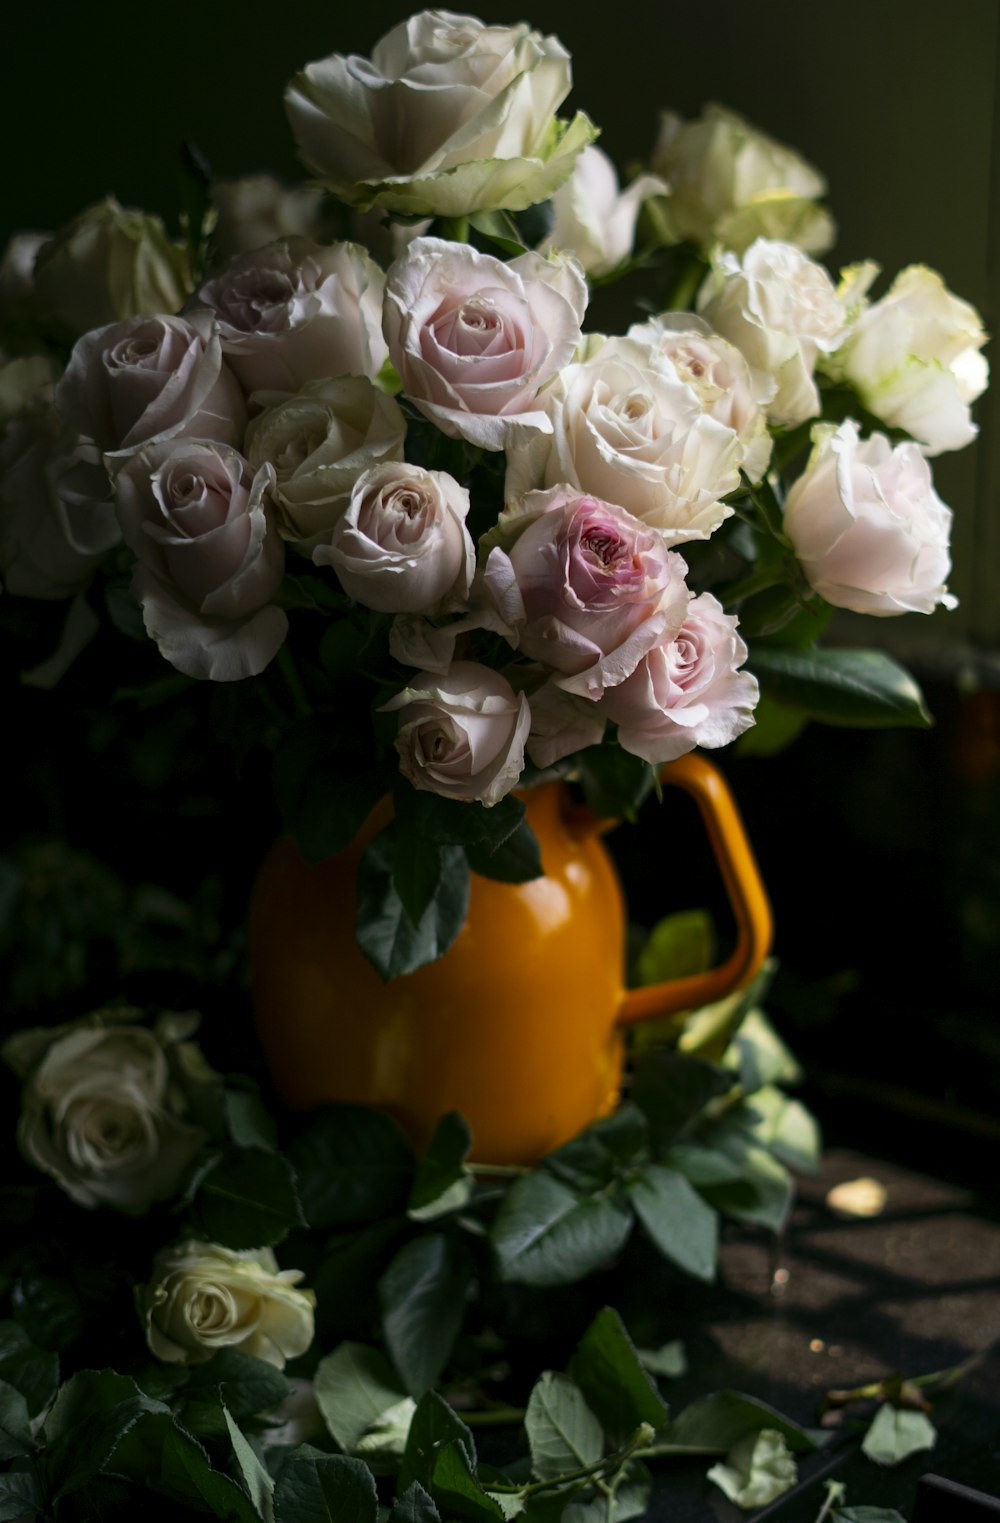 a bouquet of white and pink flowers on an orange pot